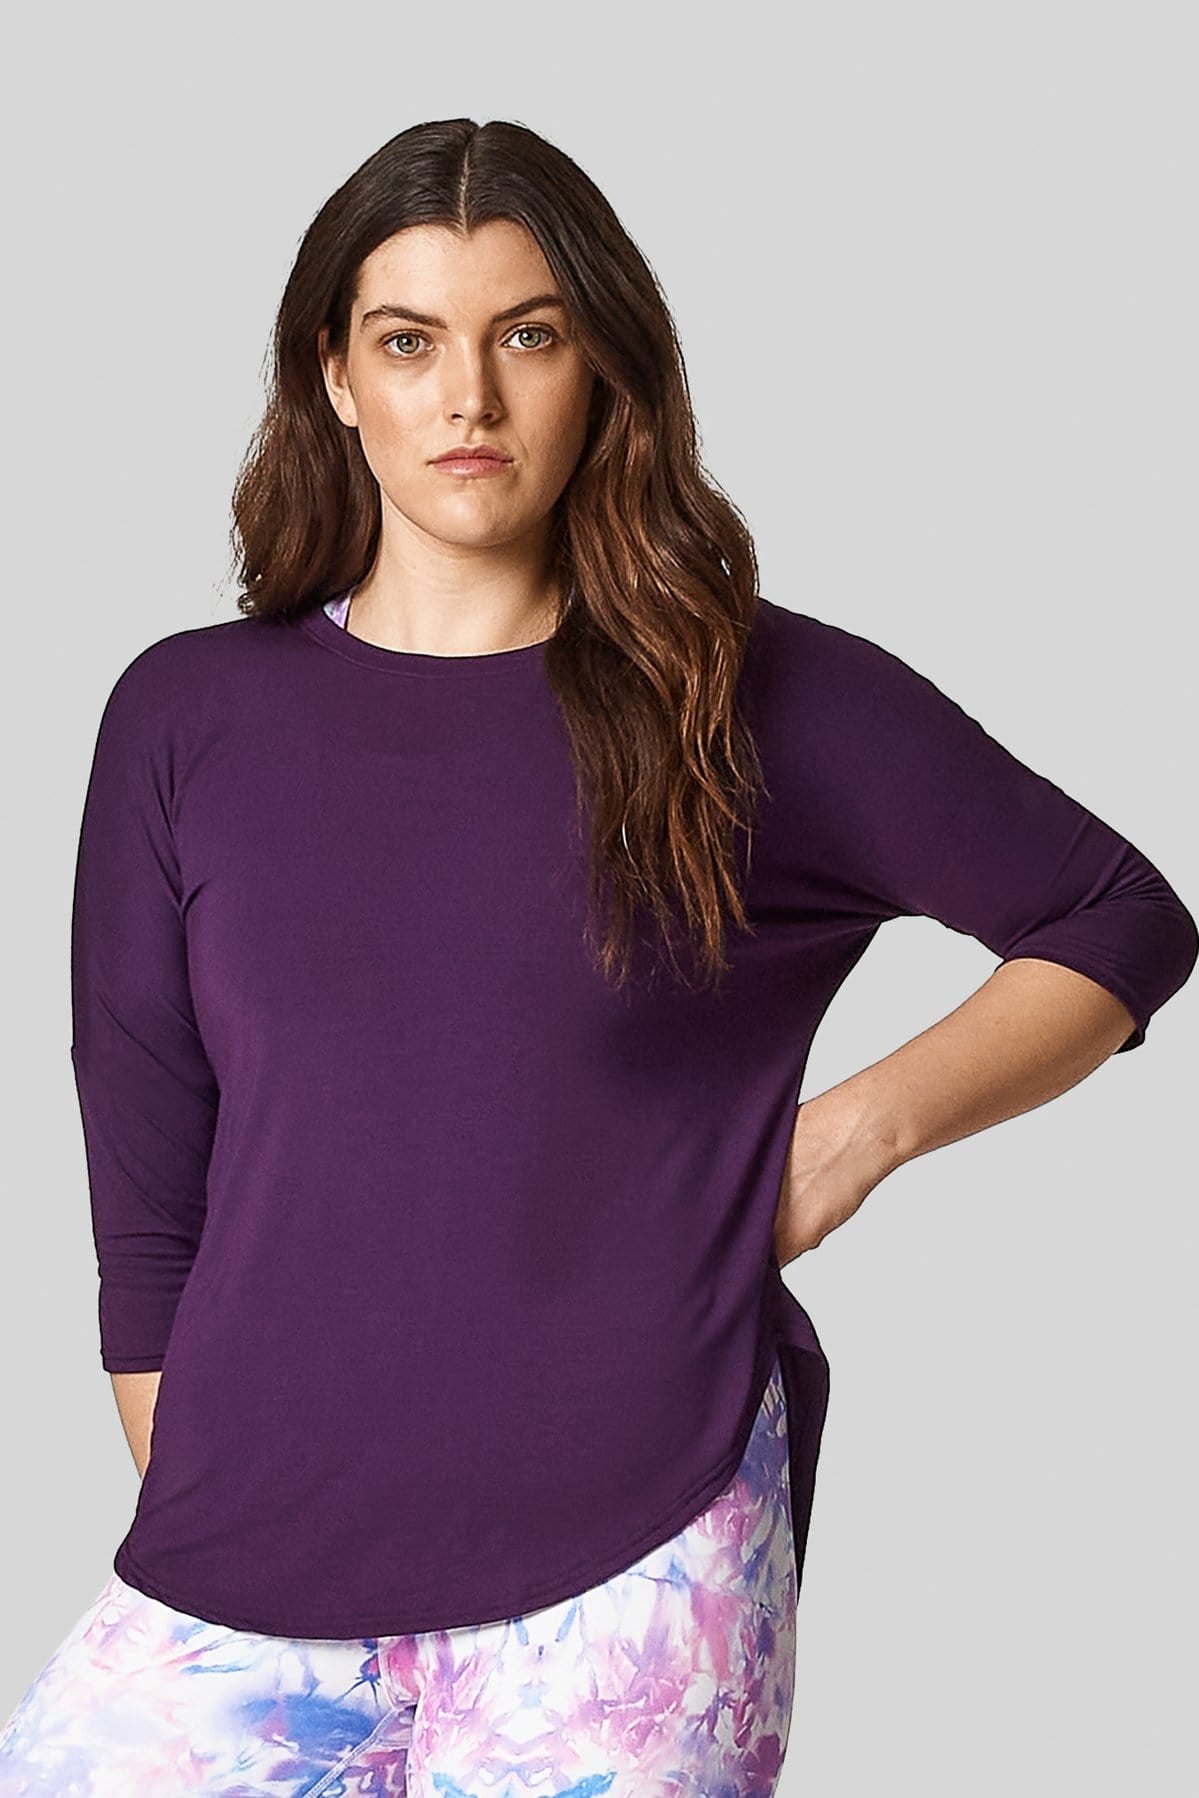 A young woman is modelling a violet shirt with 3/4 length sleeves and printed leggings.